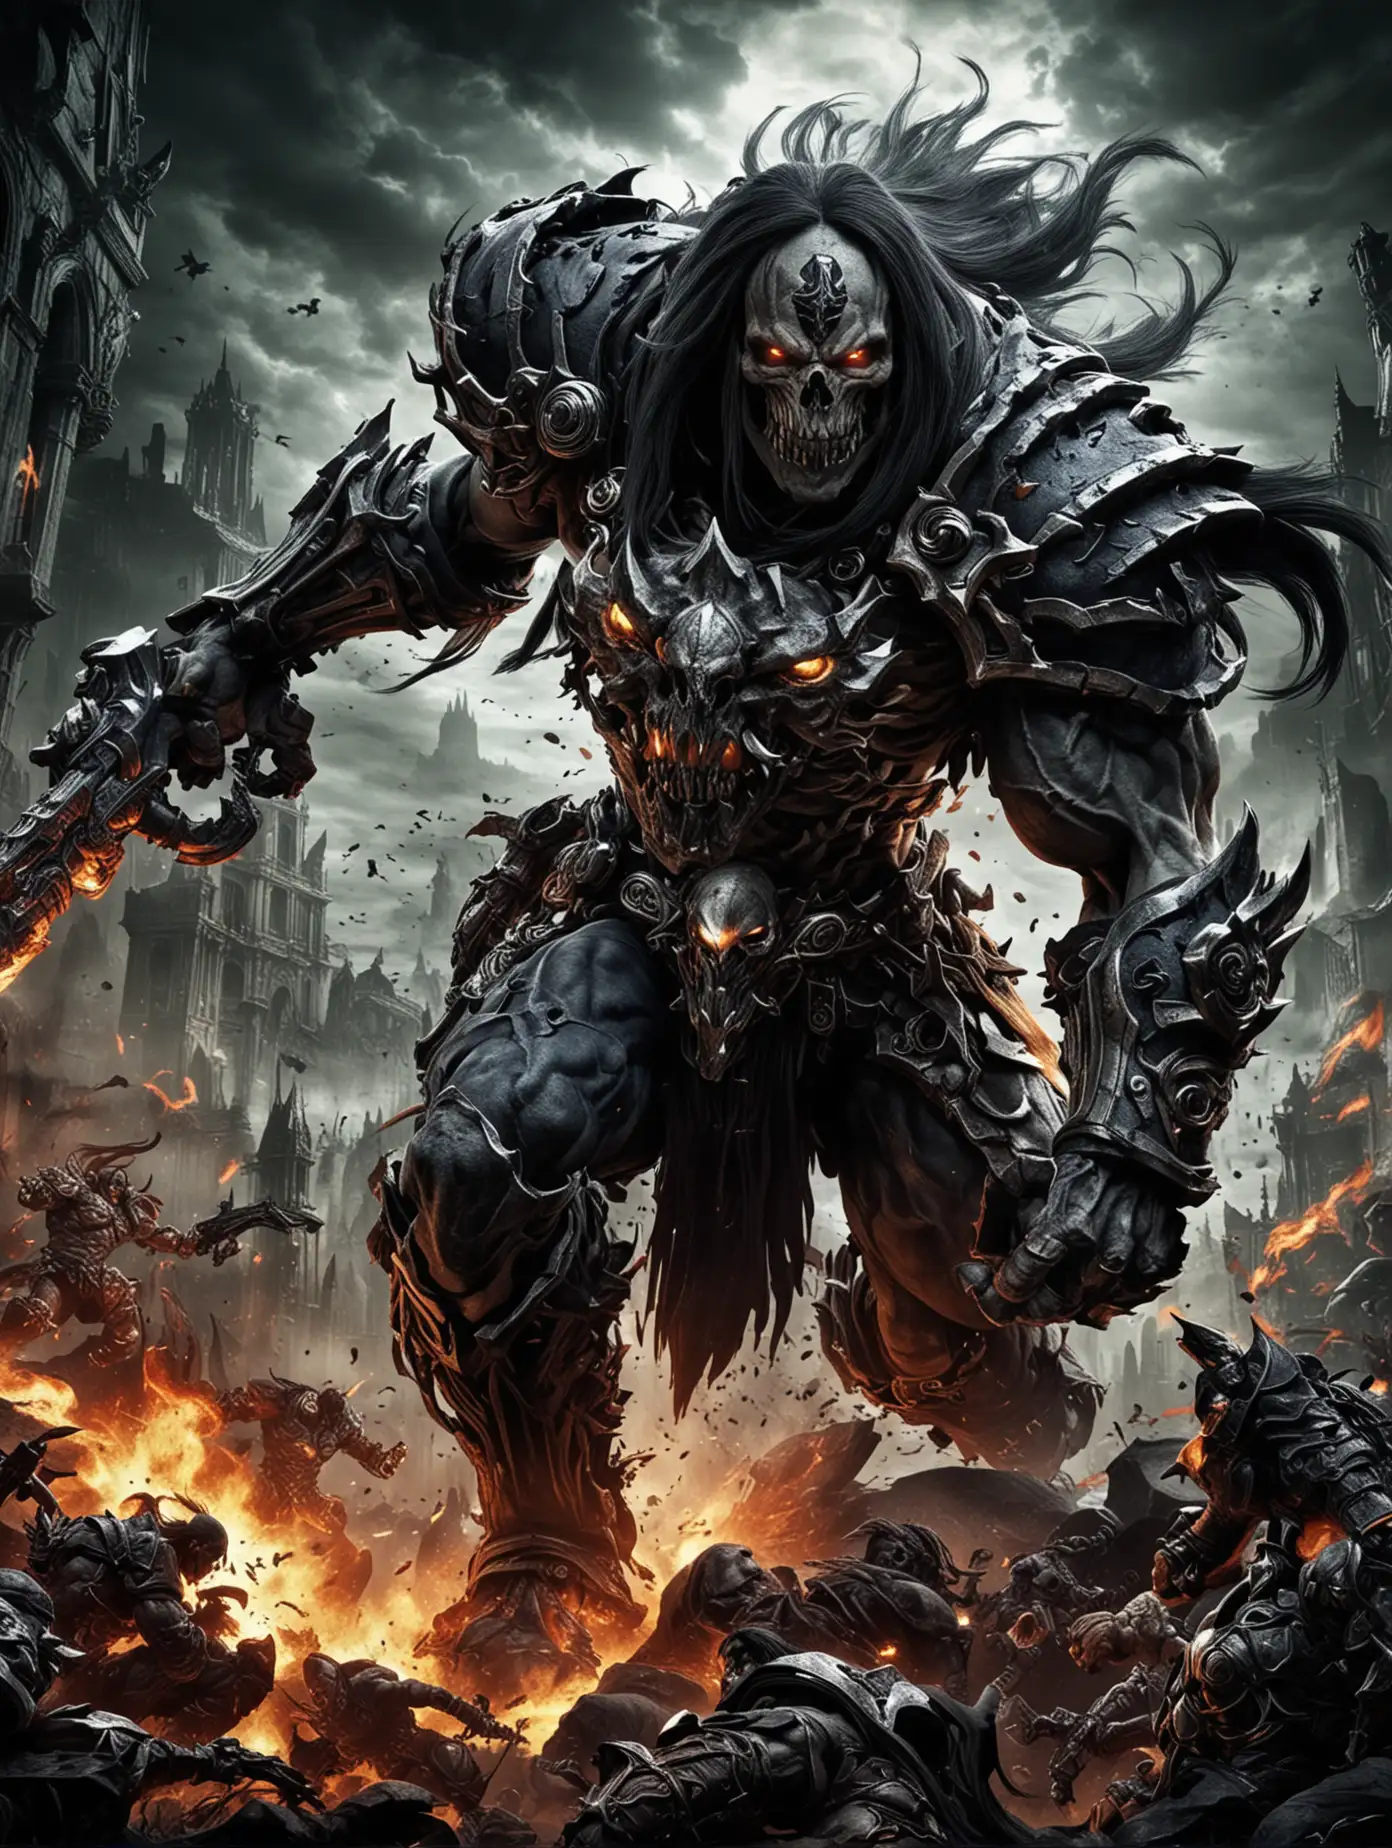 Darksiders-Video-Game-Poster-Featuring-Wars-Wrath